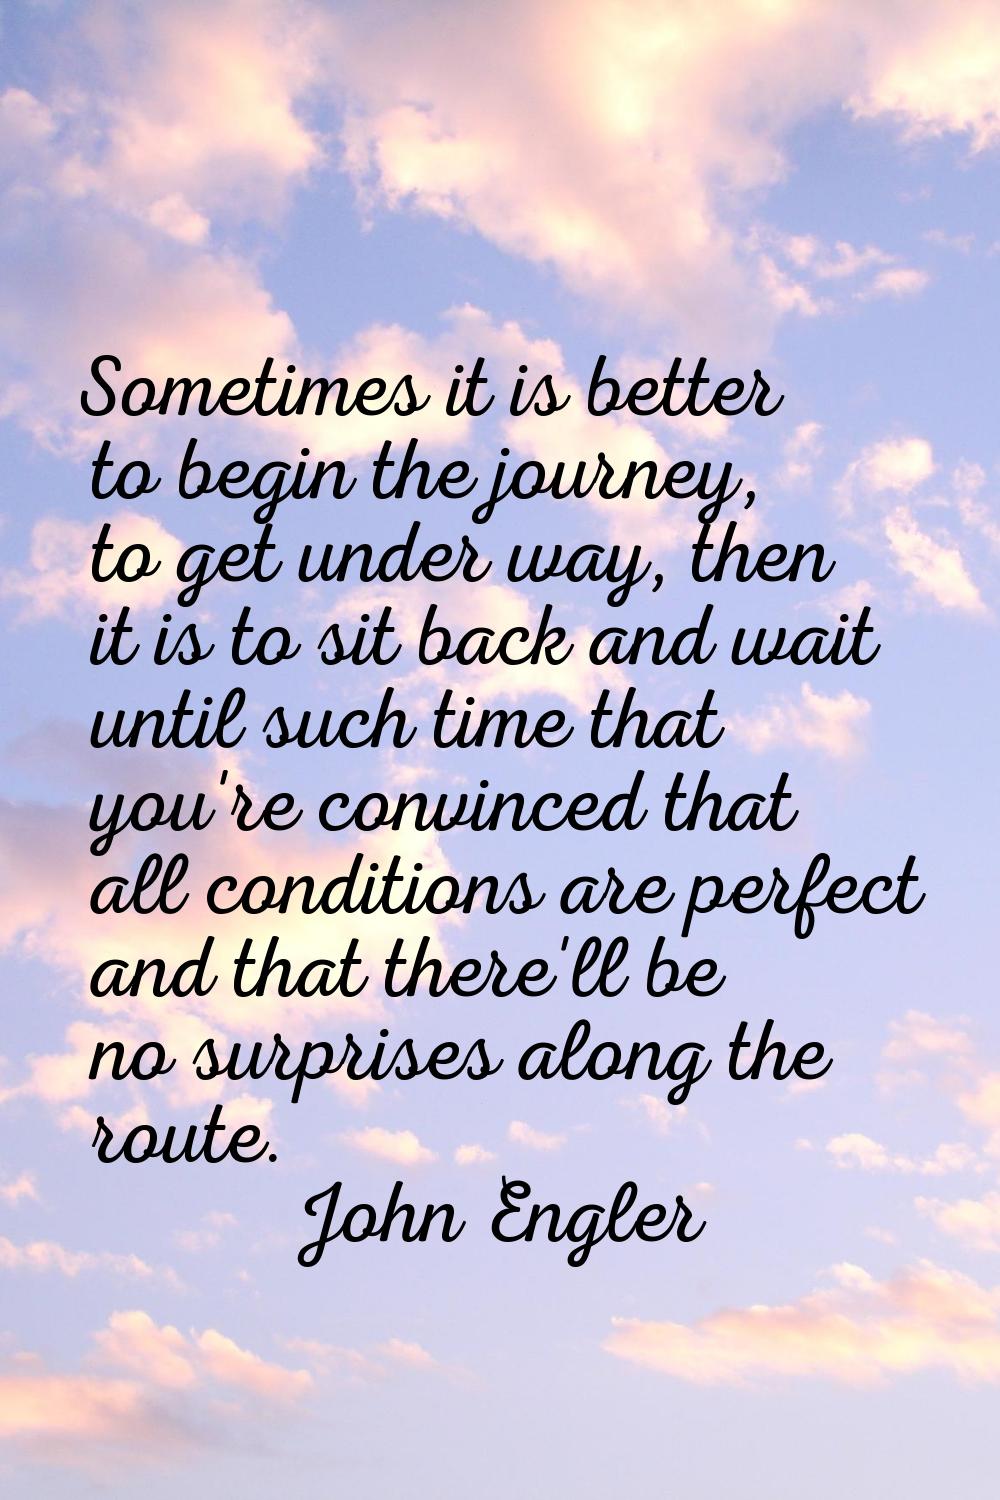 Sometimes it is better to begin the journey, to get under way, then it is to sit back and wait unti